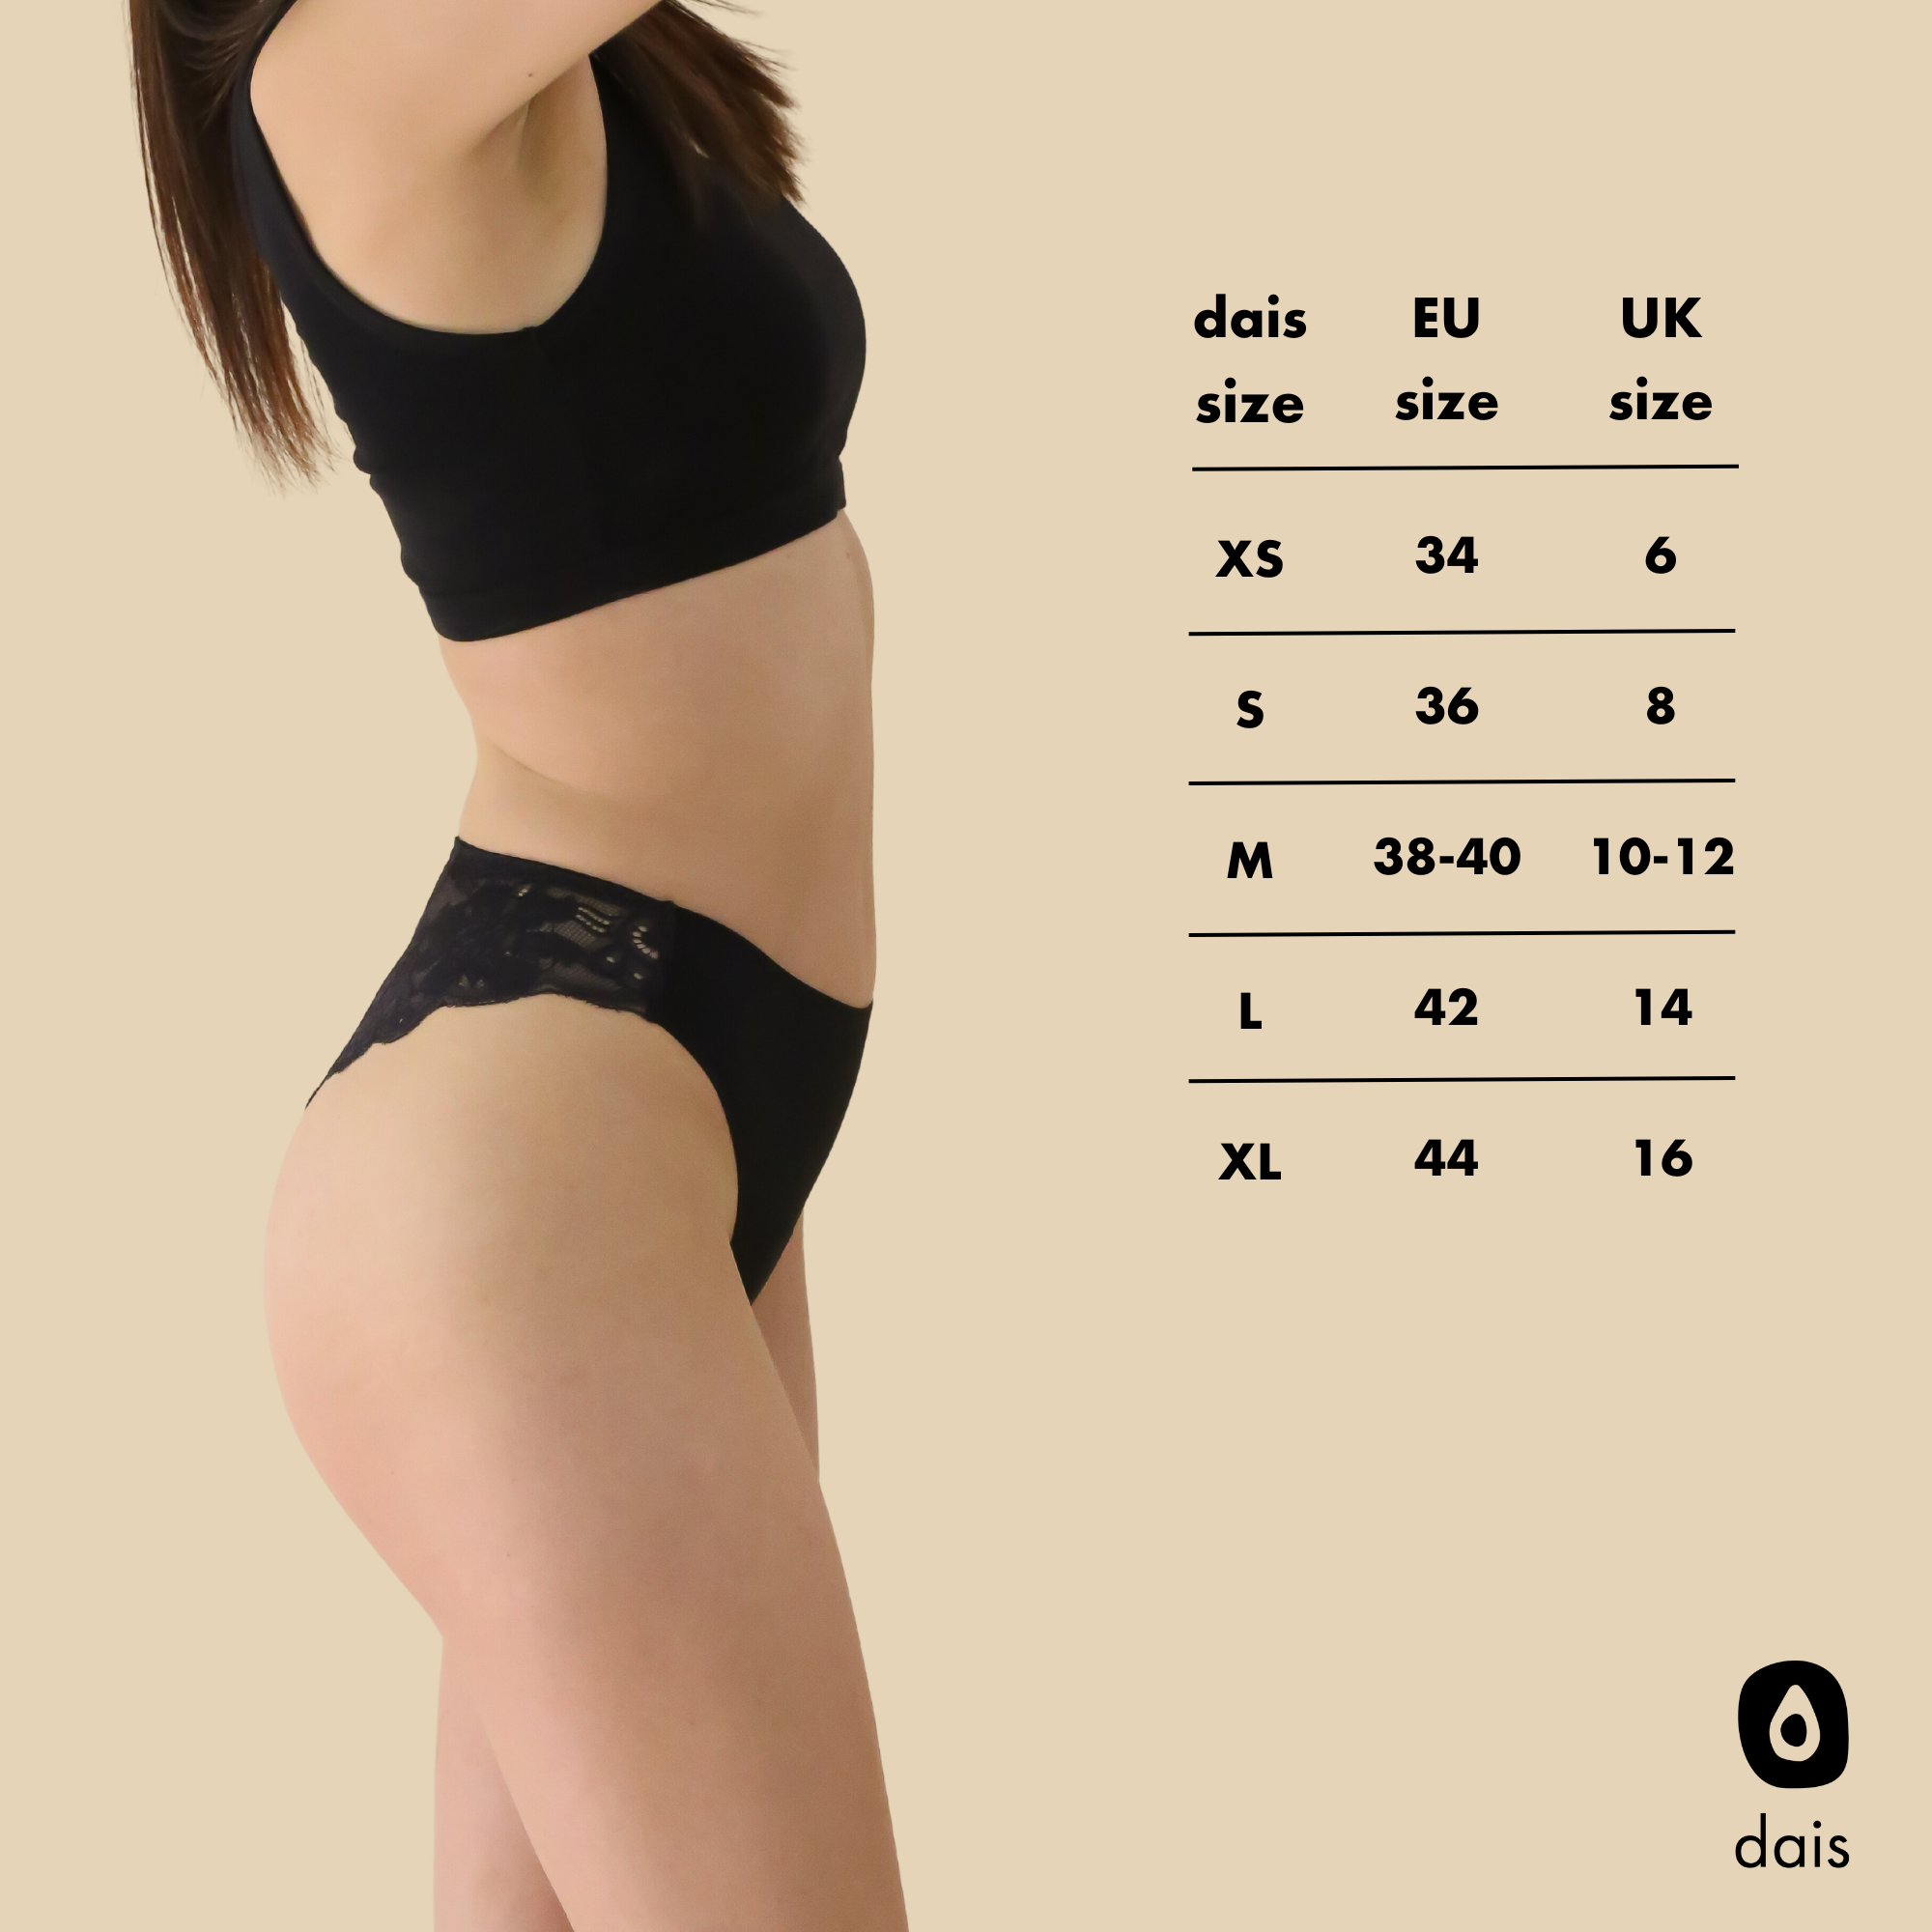 dais daily underwear size chart showing the options of XS, S, M, L and XL with Eu and UK size conversions.